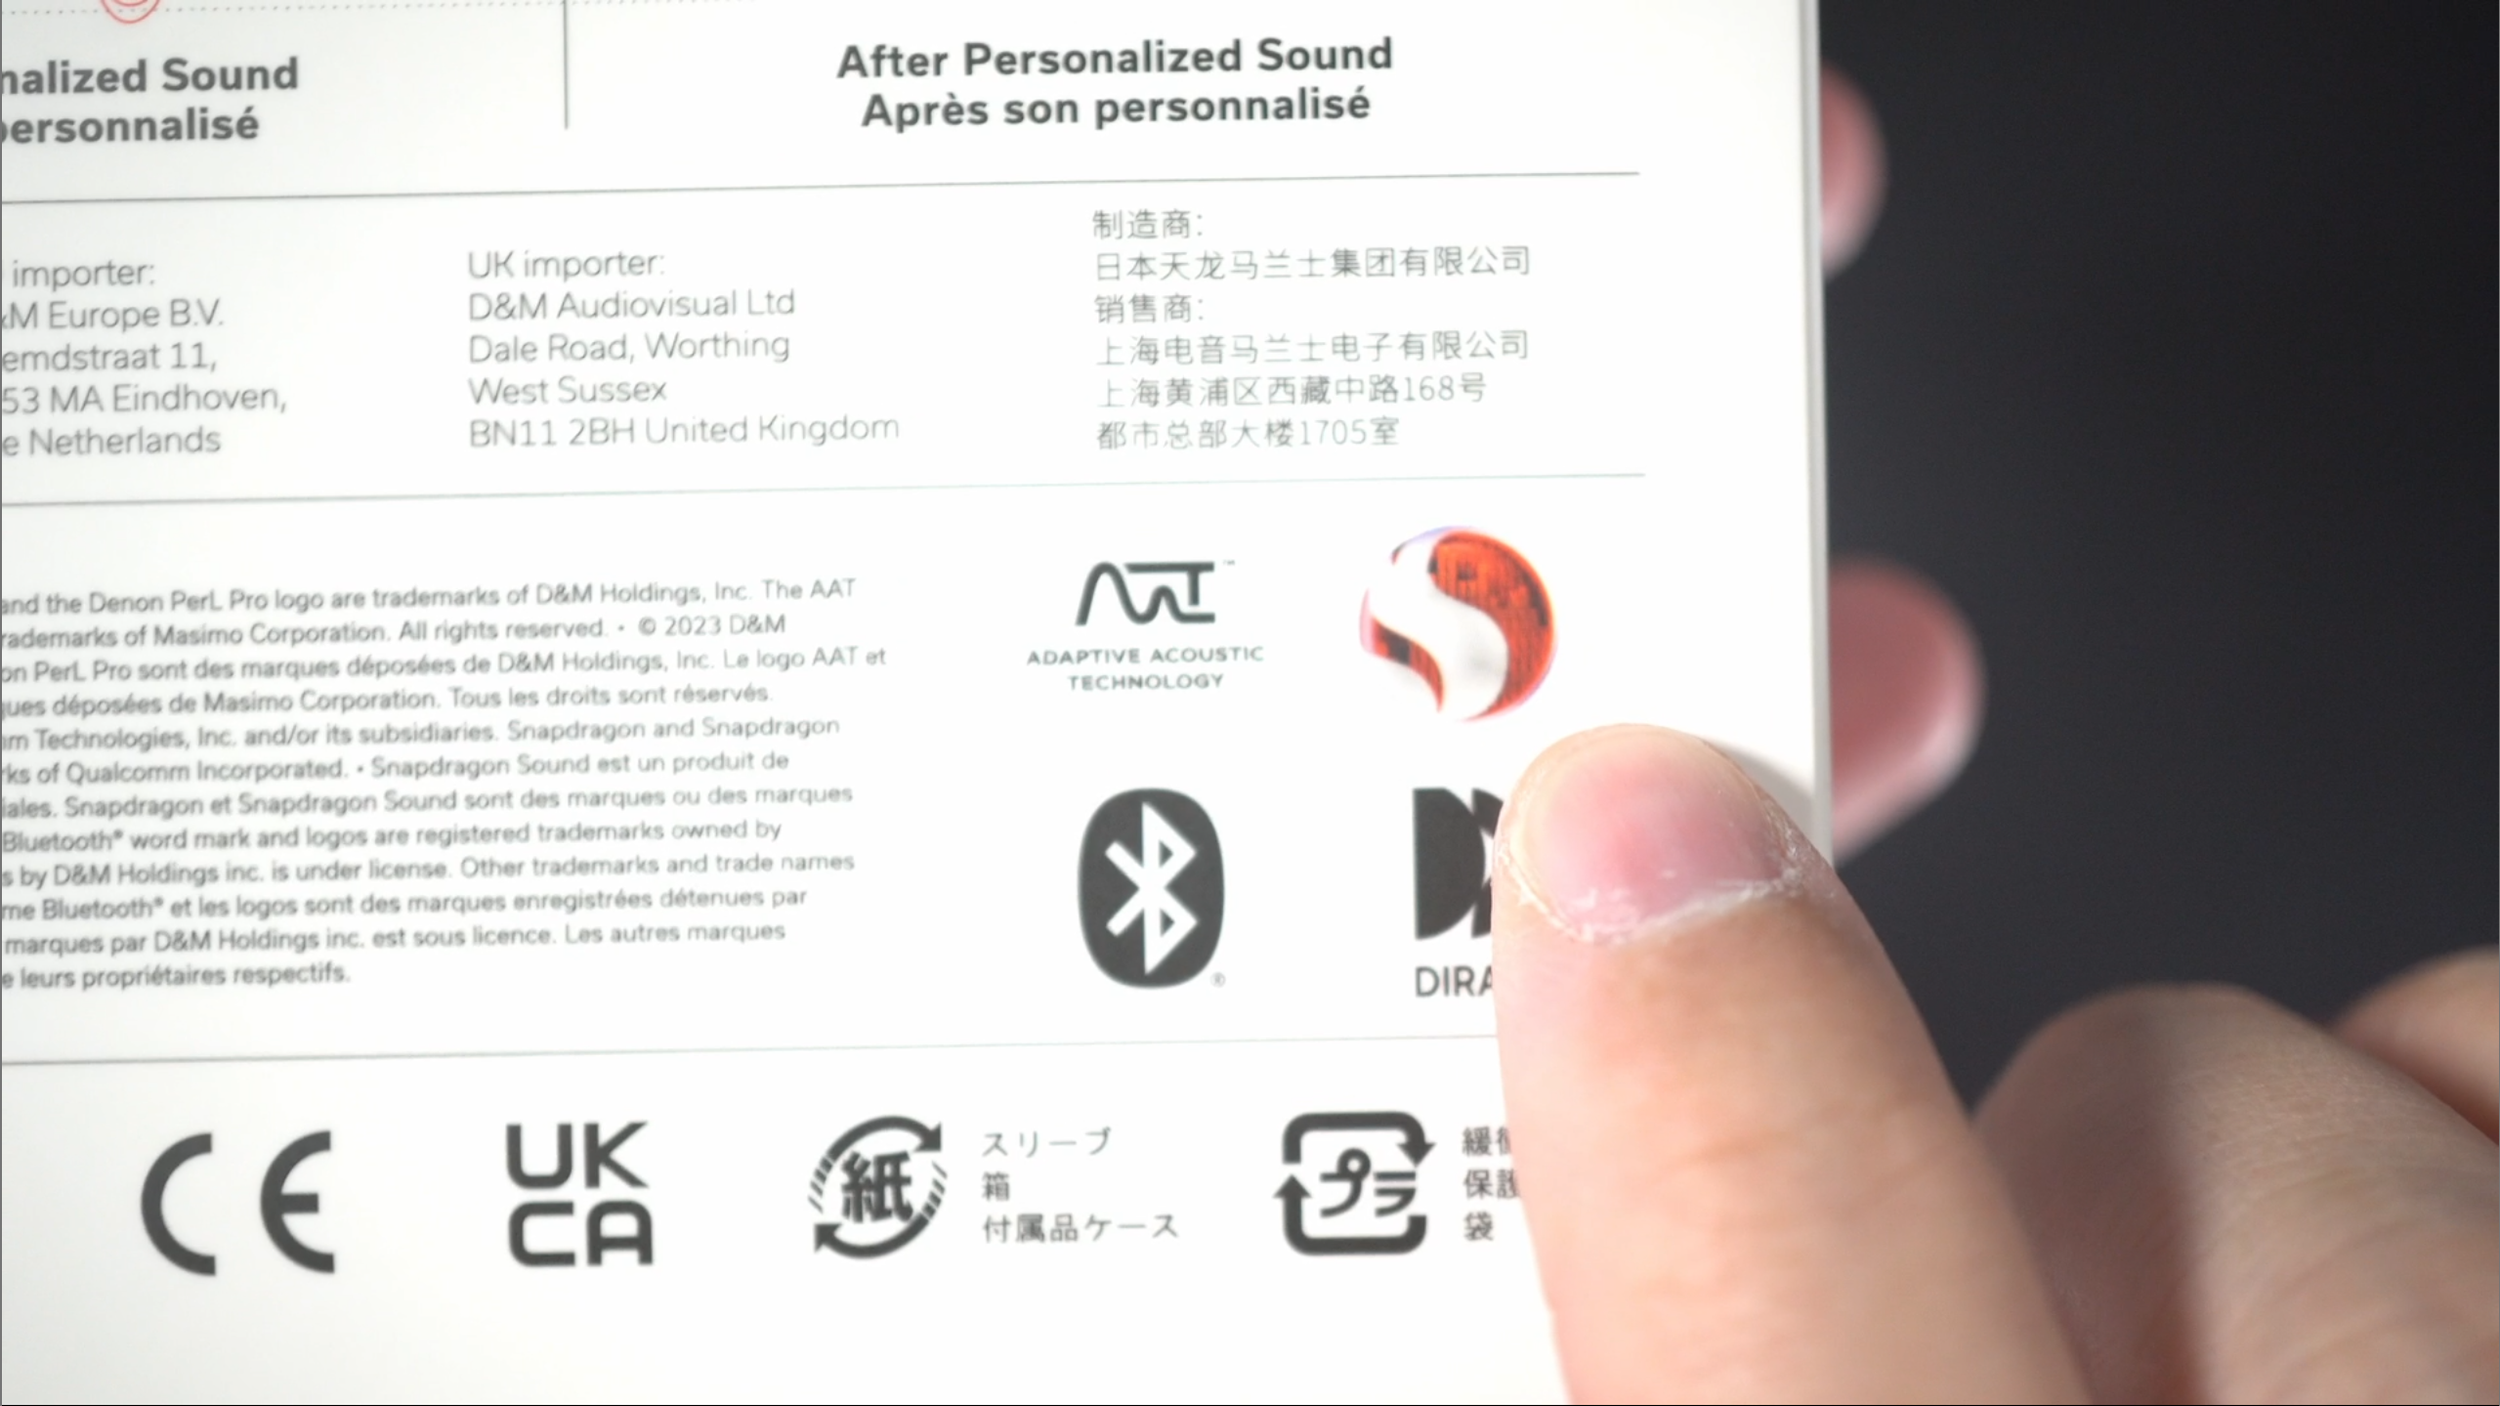 Denon PerL Pro review snapdragon sound.png